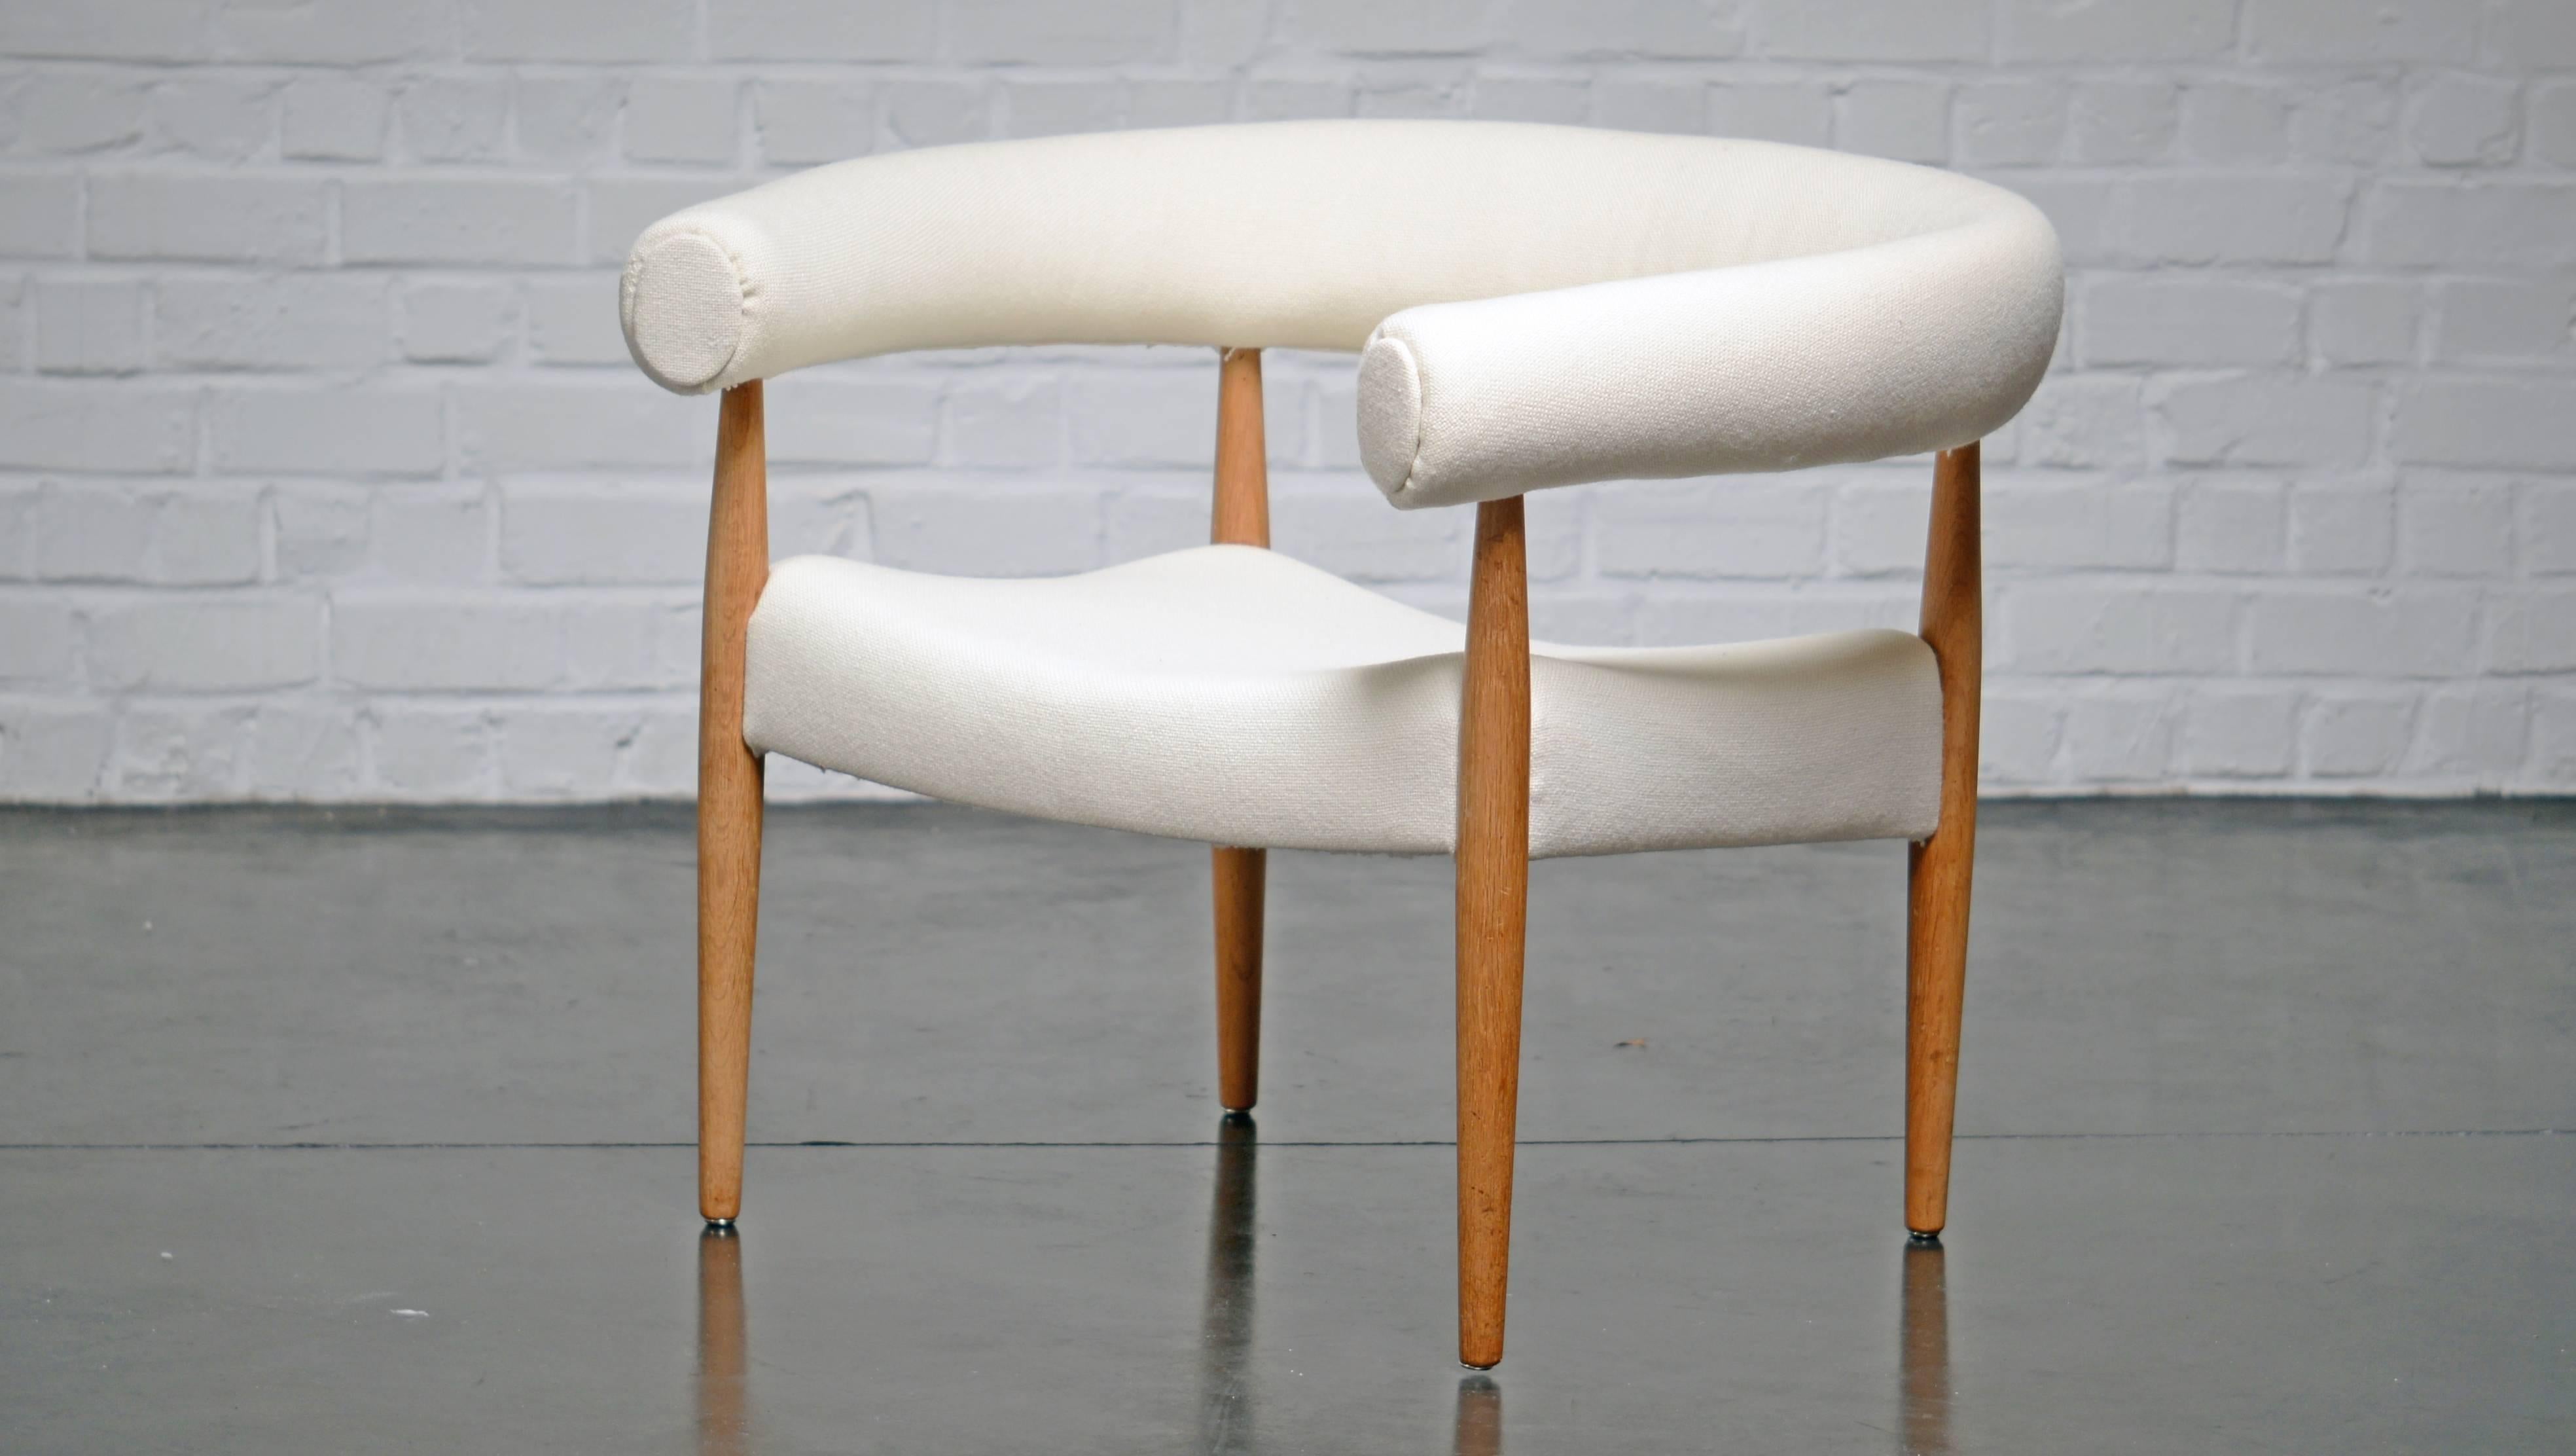 Danish Nanna Ditzel Pair of Sausage Easy Chairs Made by Kolds Savværk, 1958 For Sale